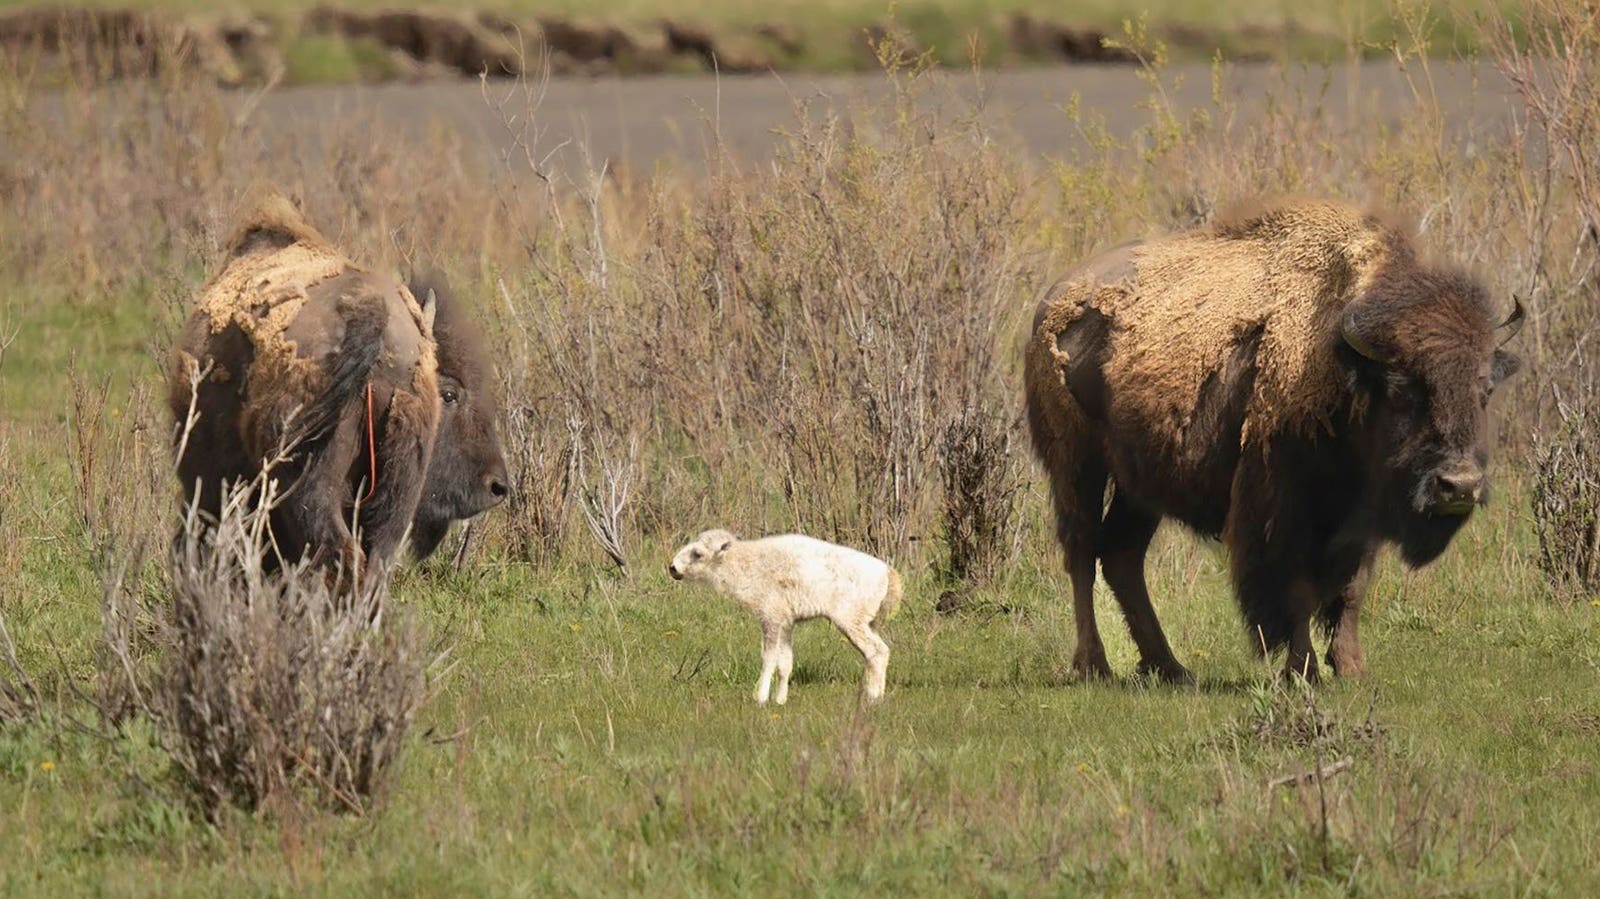 Rare White Buffalo Calf Celebrated By Native Americans Goes Unseen For Weeks, Yellowstone Says